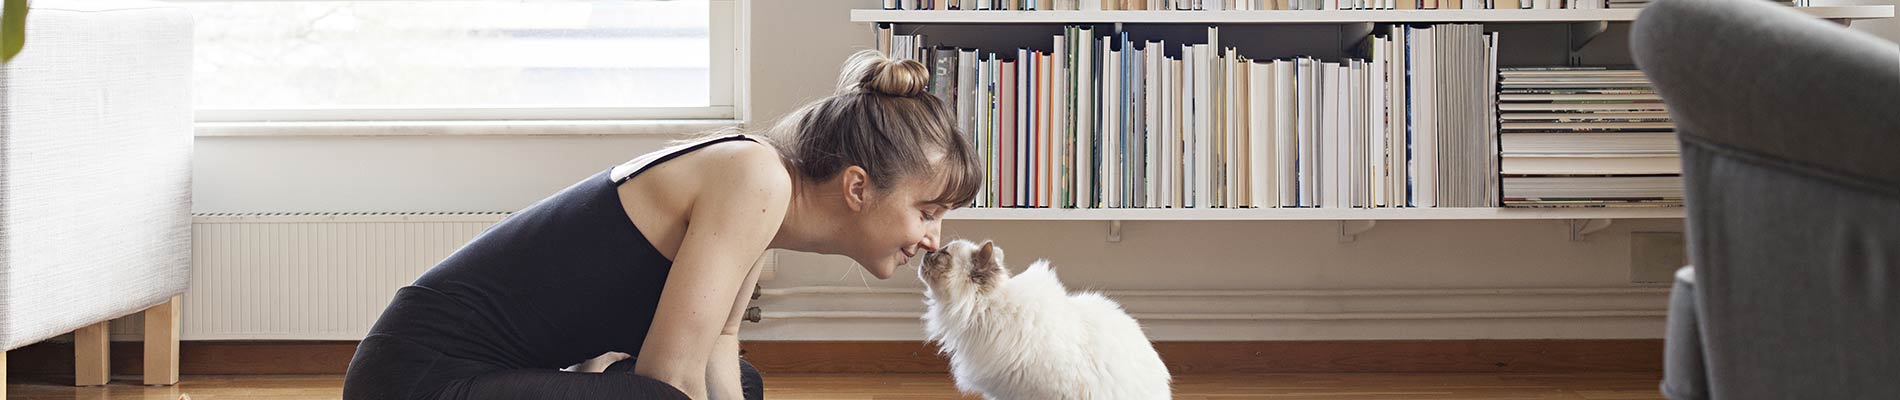 A woman sitting on the floor touching noses with a white cat